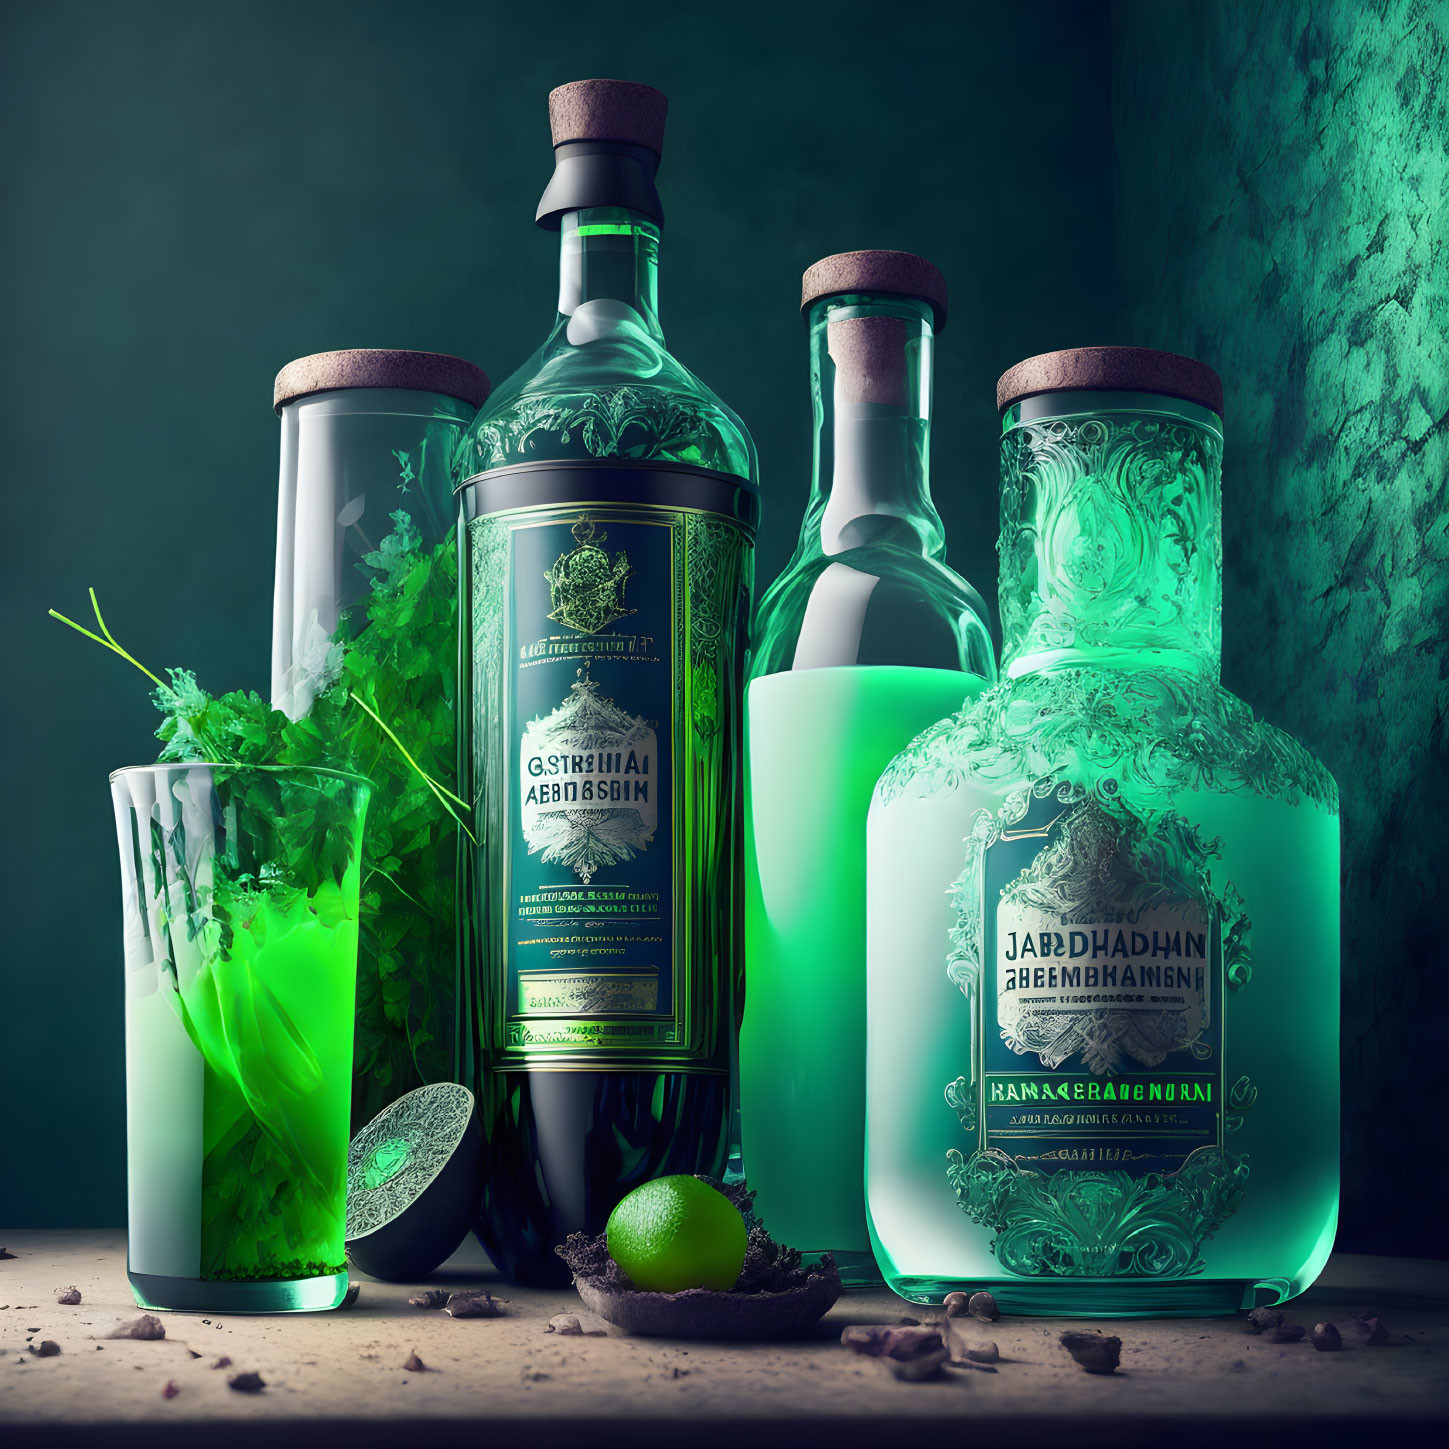 Ornate glowing spirits bottles with herbs and lime on dark background